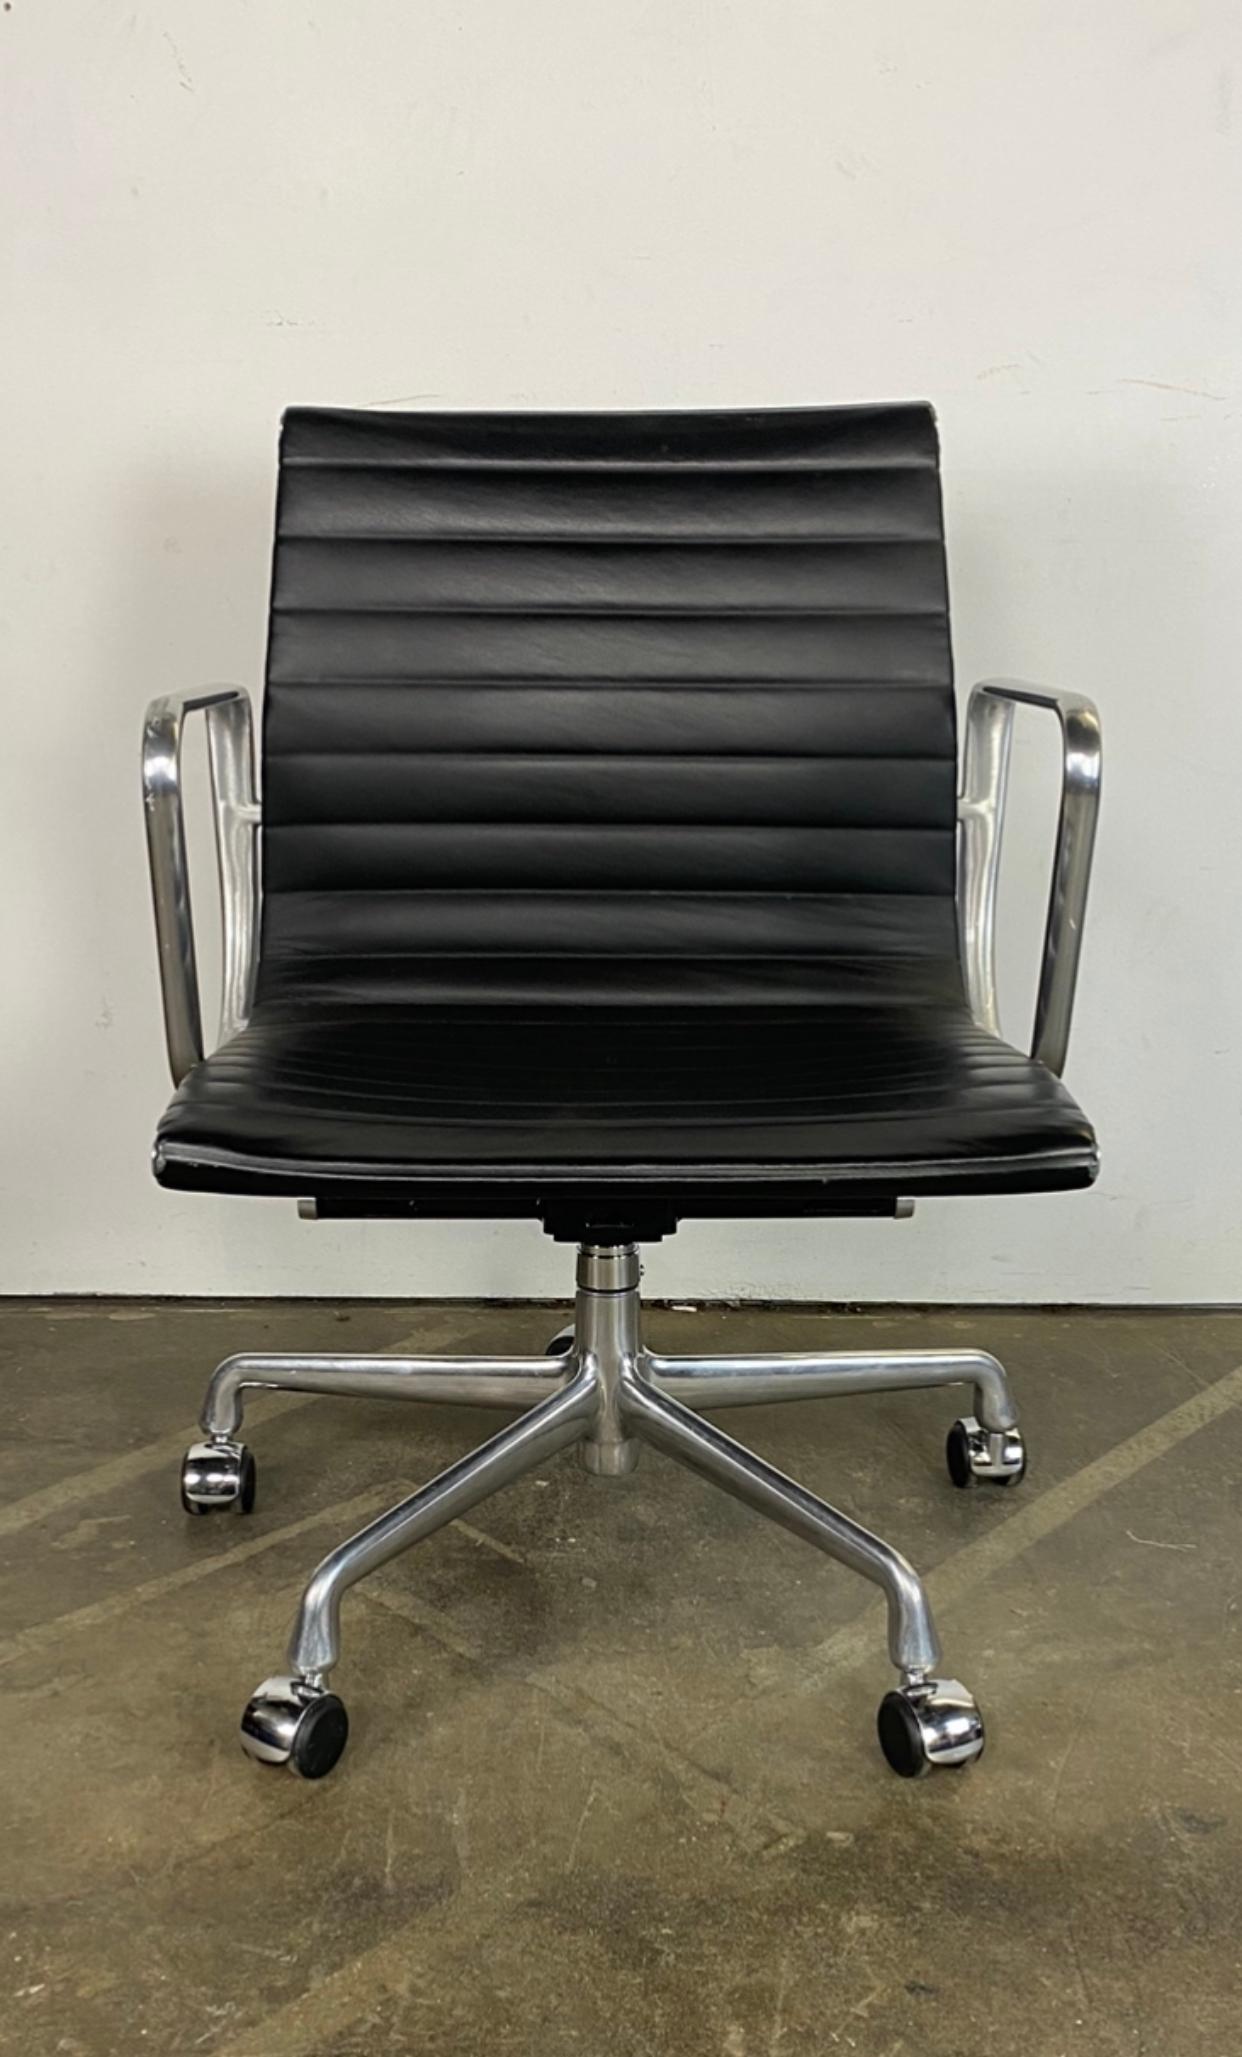 Gorgeous edition of the classic Eames office chair for Herman Miller. Management armchair is executed in polish aluminum and black leather. Minimal wear from age and yes. The arms are in better than average condition and everything is in perfect